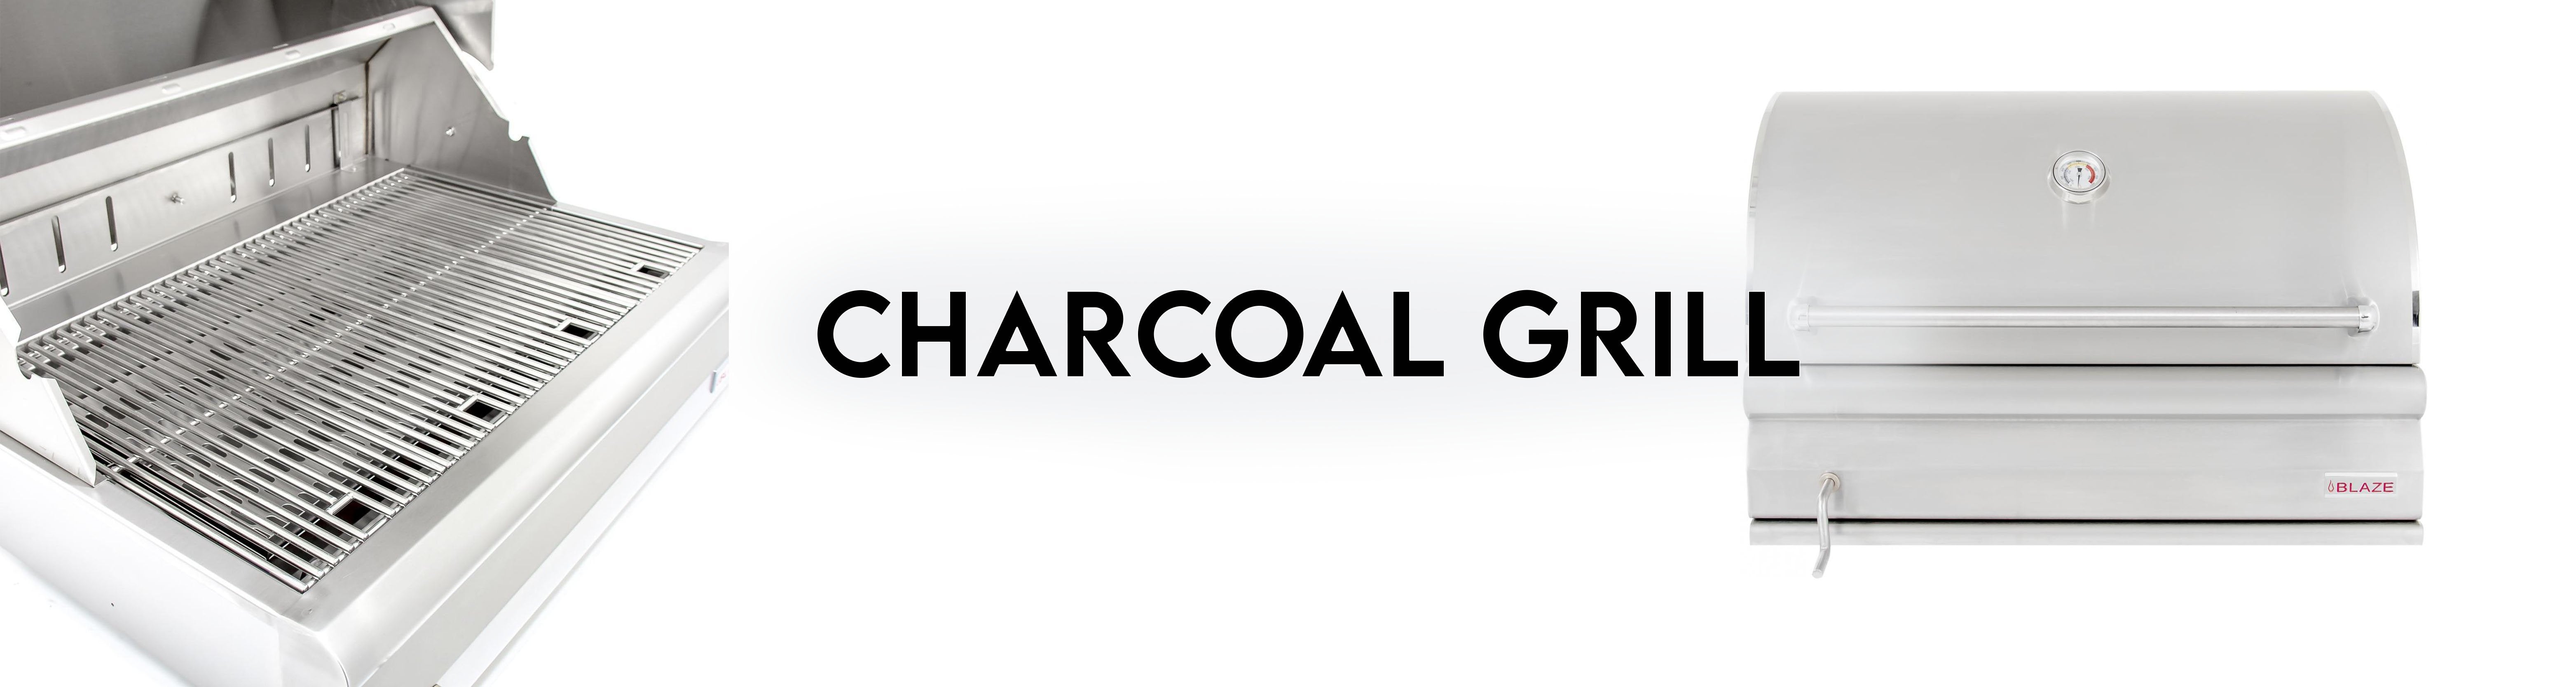 Charcoal Grill - Recreation Outfitters